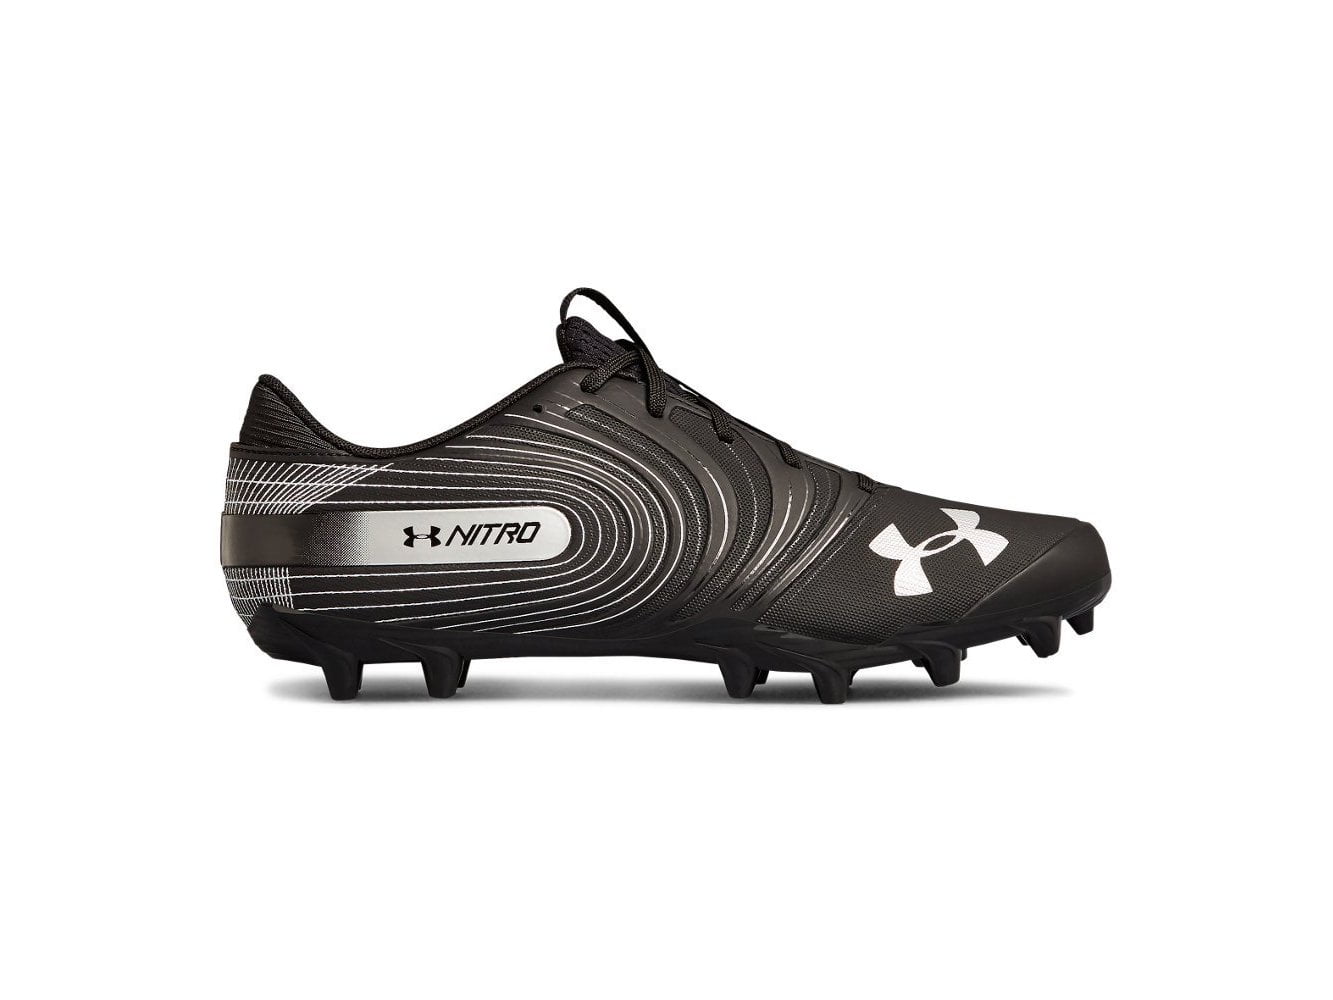 NEW in BOX Under Armour UA Mens Football Cleats Team Nitro Low D 1291122-101 